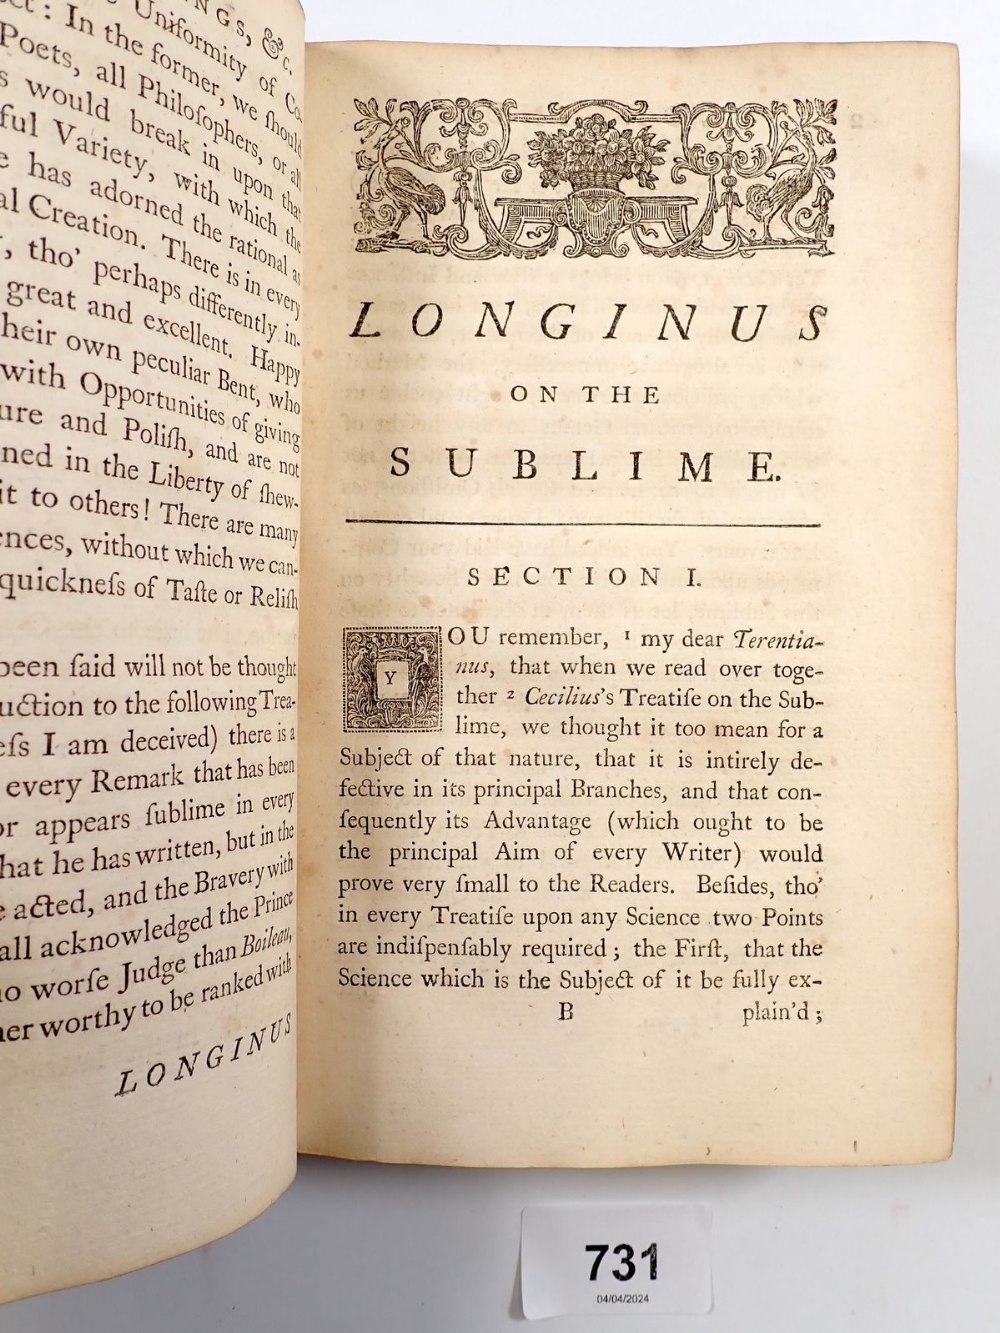 Dionysius Longinus on the Subline translated from the Greek by William Smith 1739 - Image 3 of 3